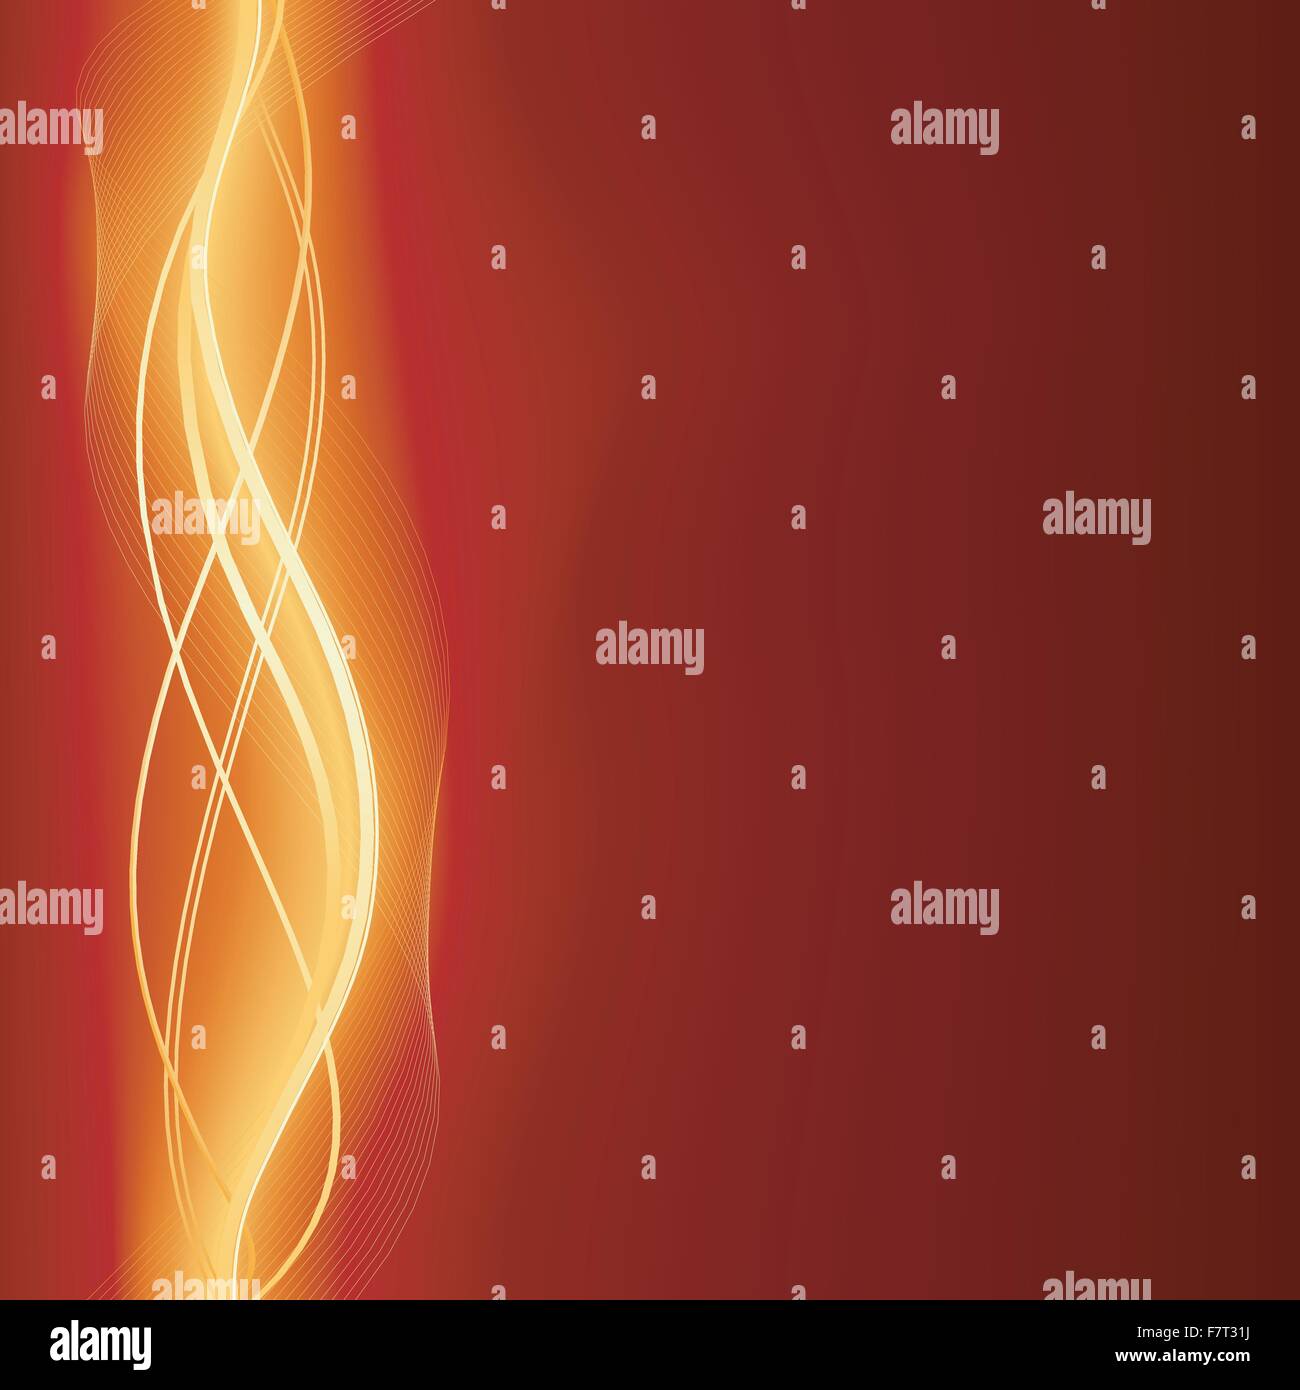 Glowing abstract wave background in flaming red golden Stock Vector